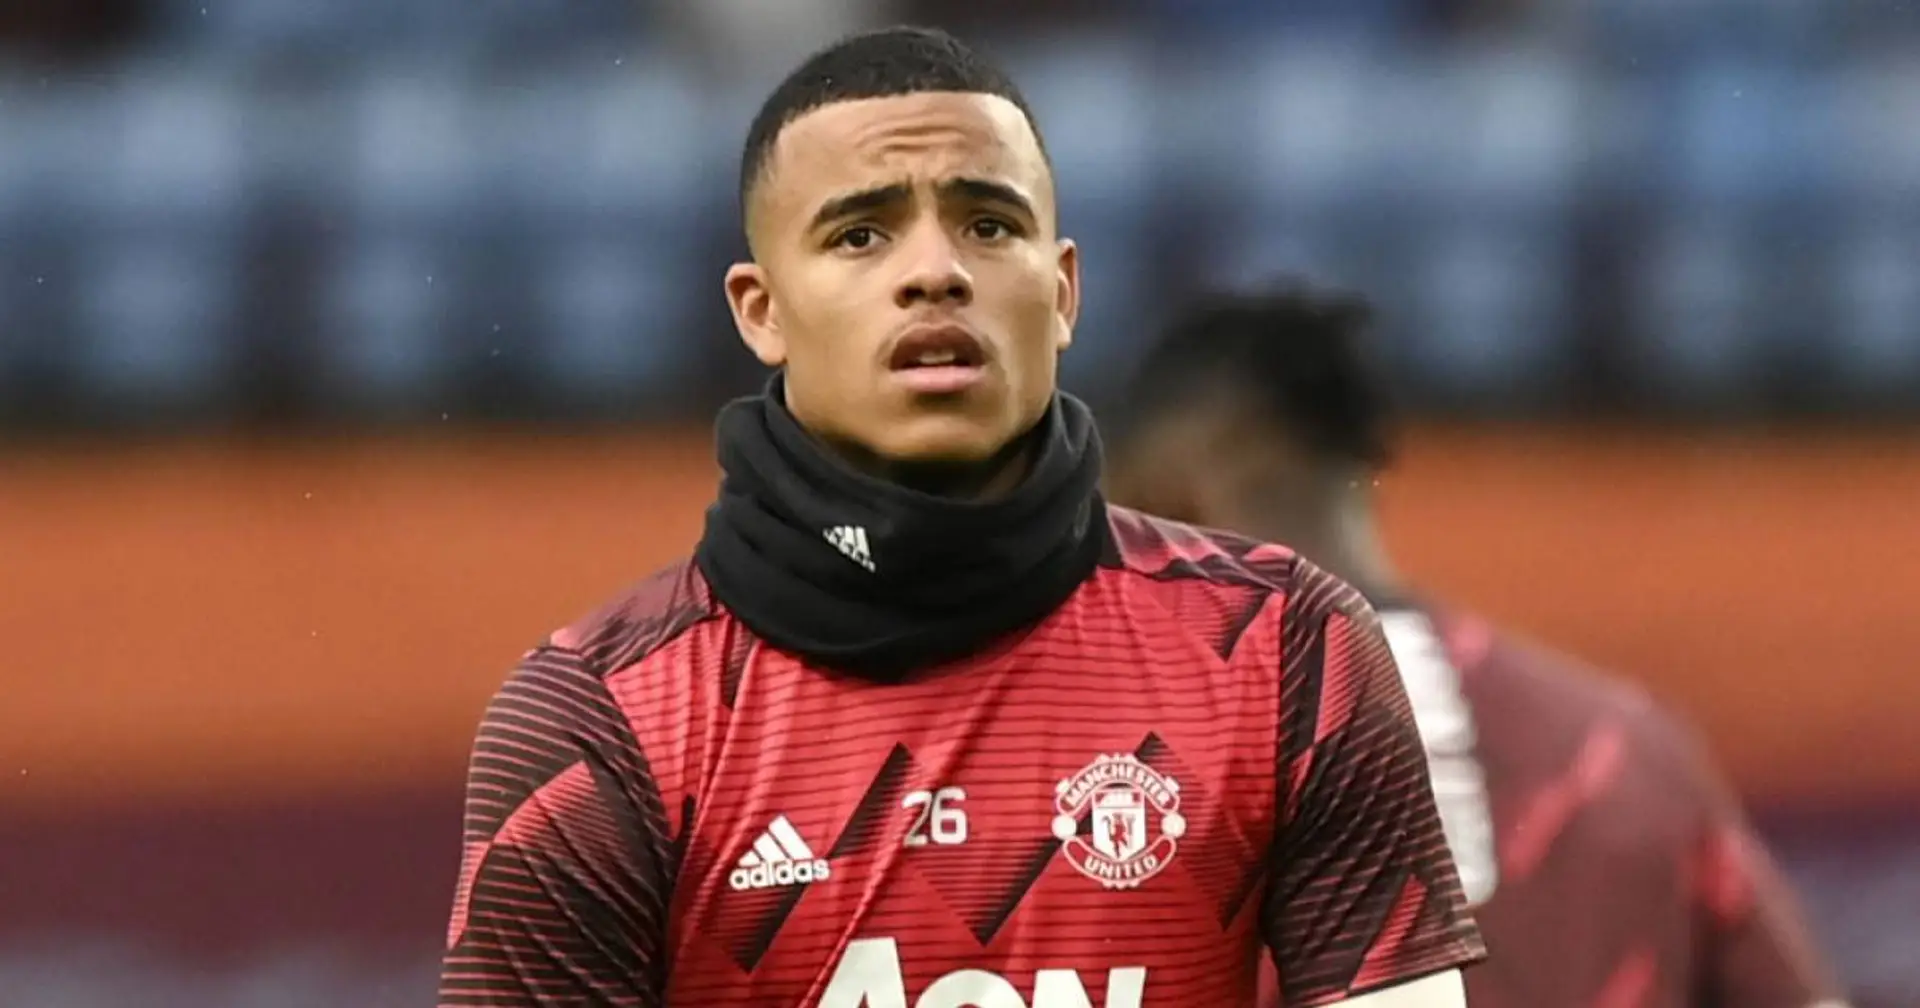 Juventus 'enquire' about signing Mason Greenwood (reliability: 3 stars)